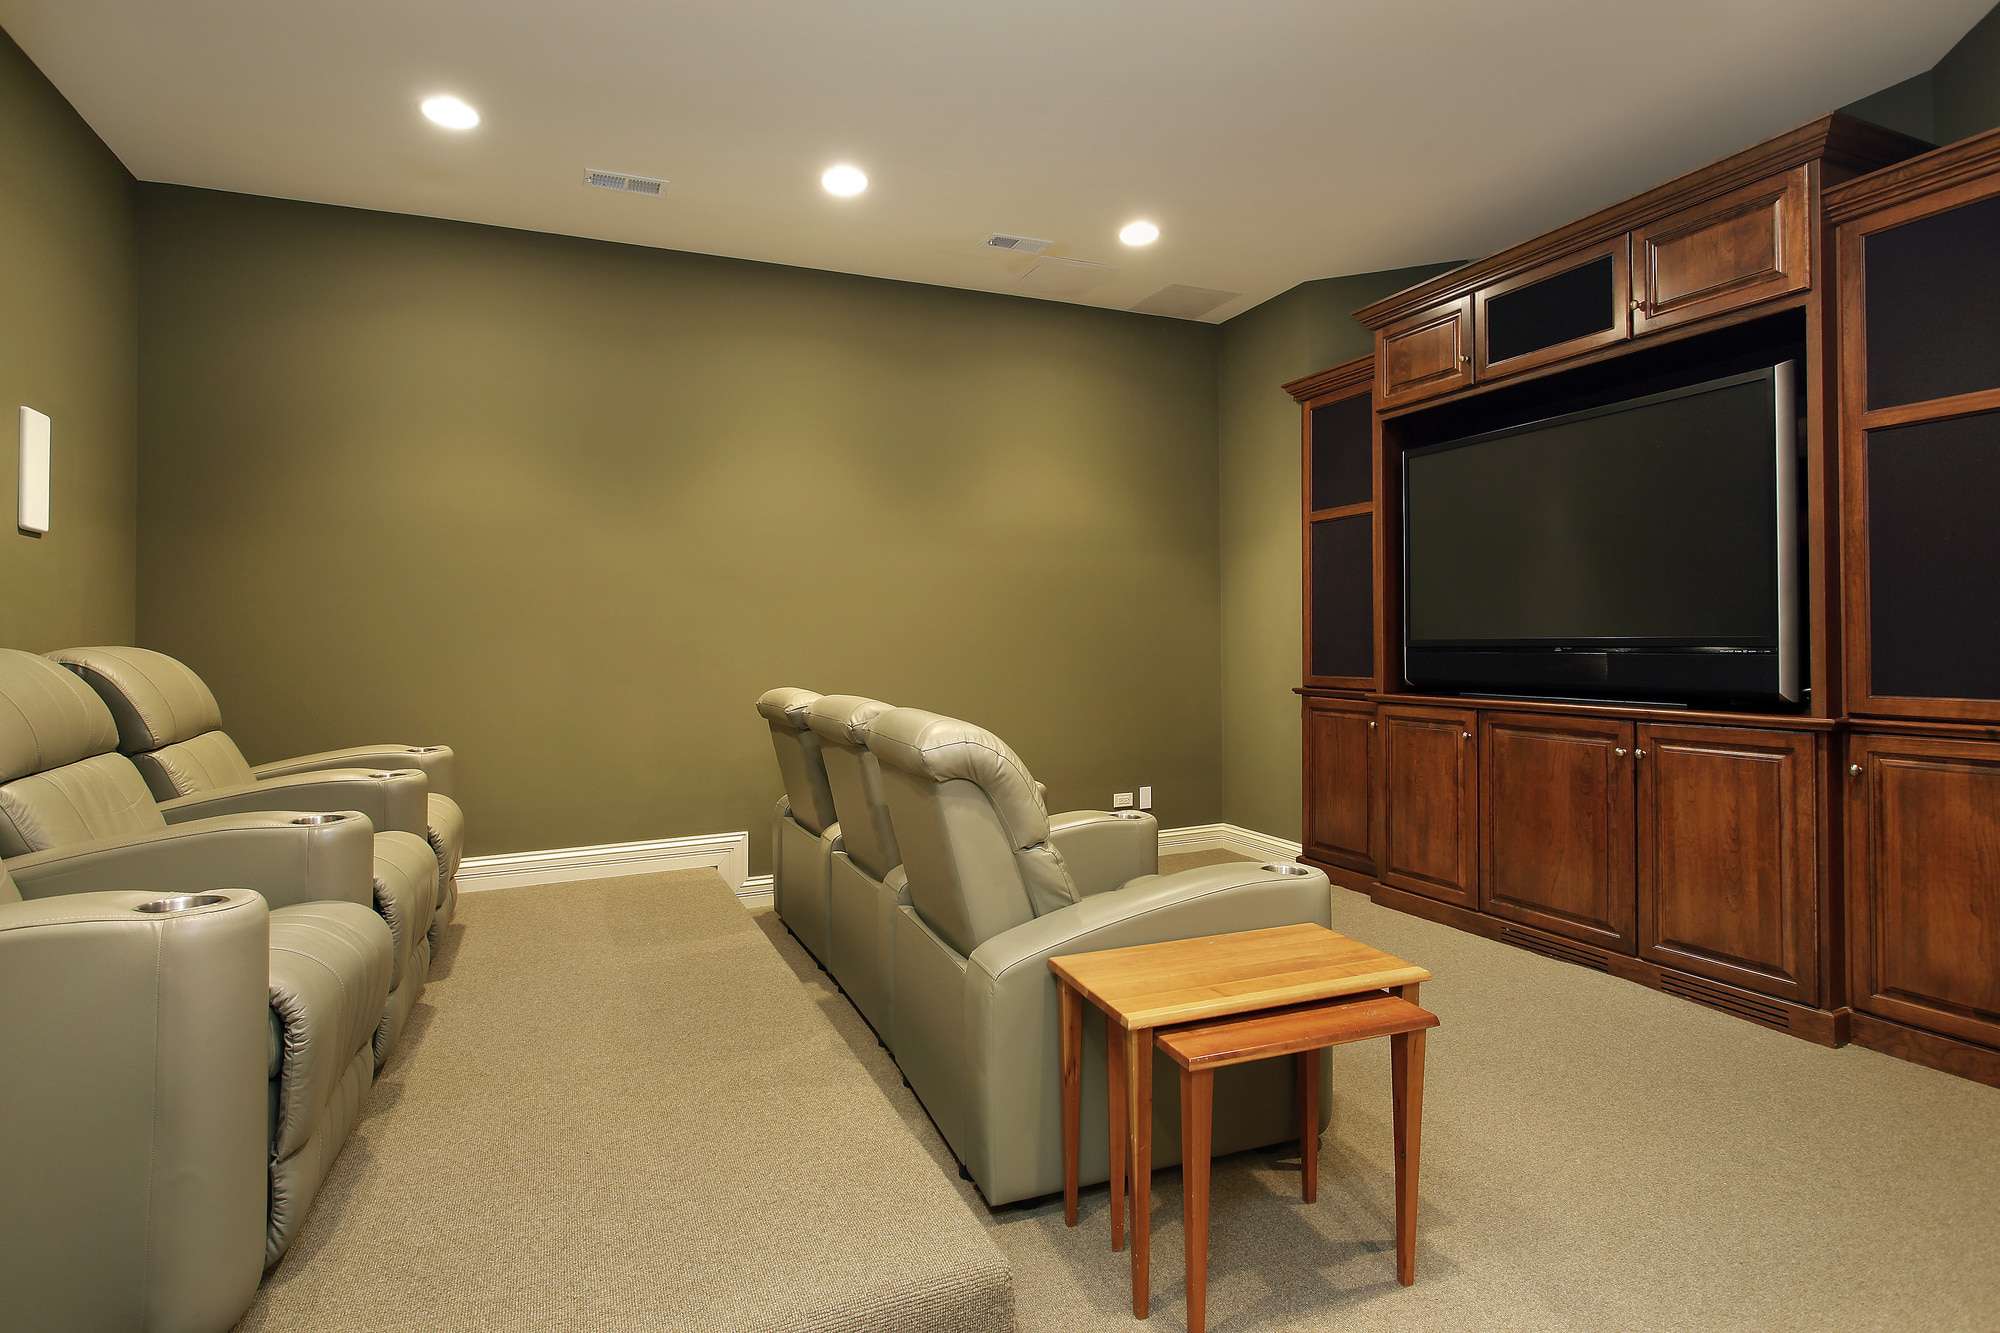 Home theater design with theater seating